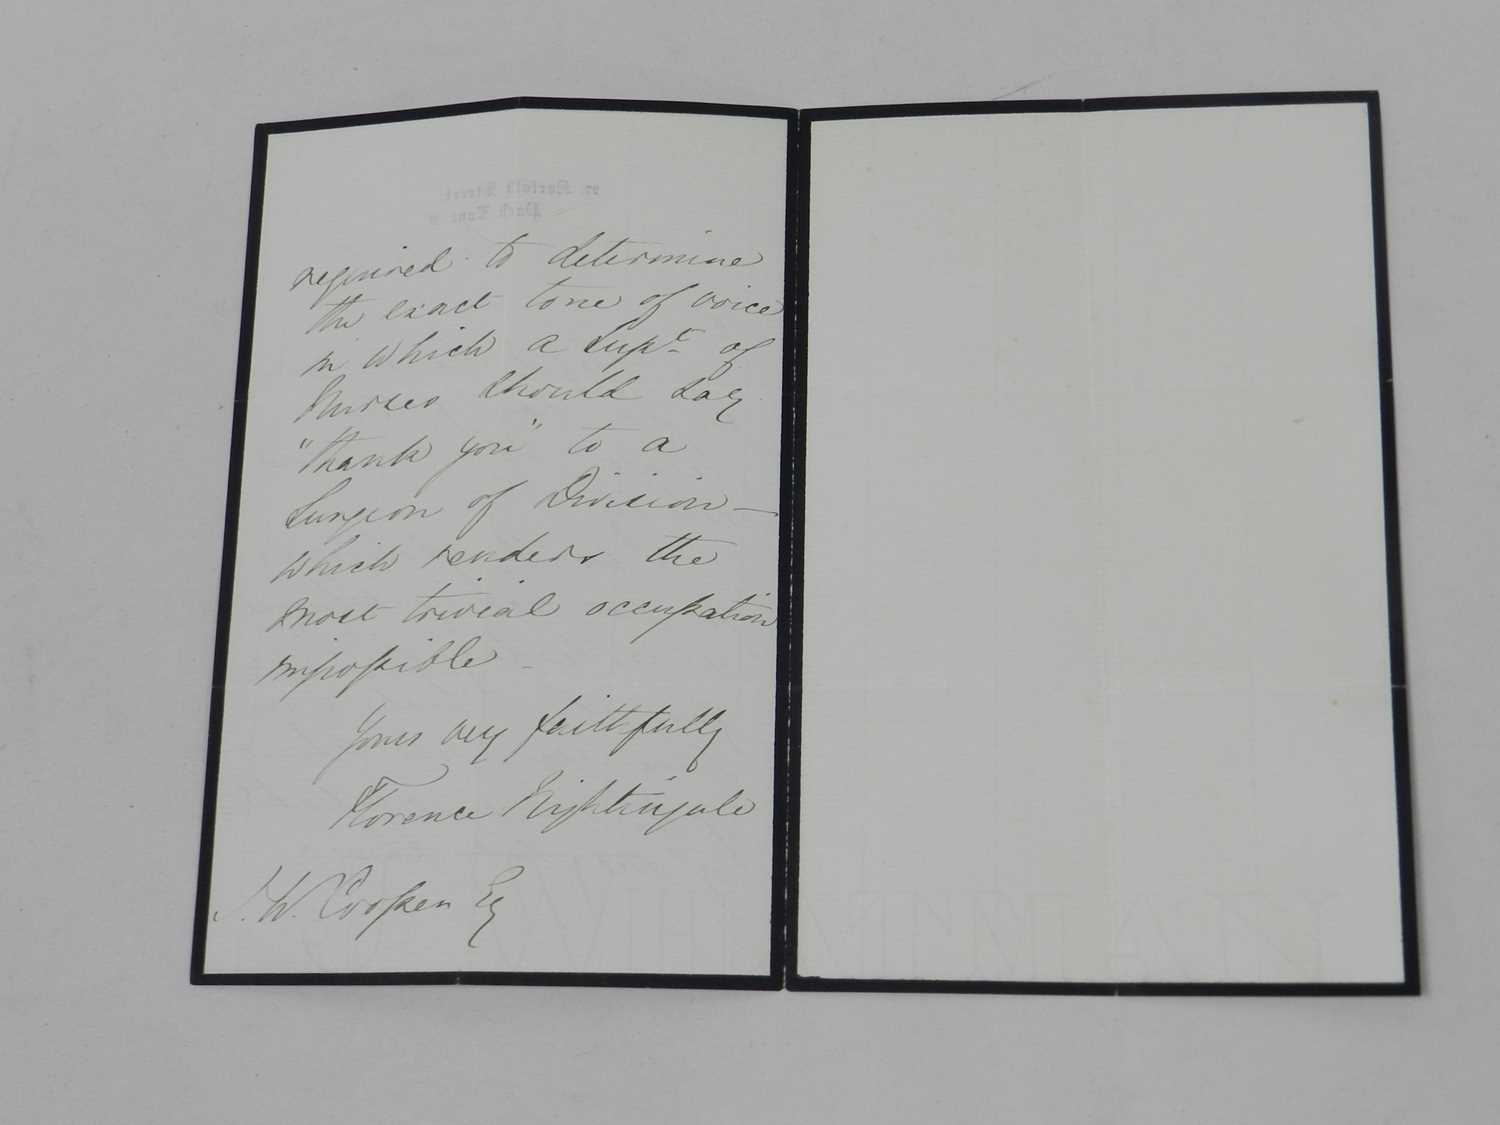 NIGHTINGALE, Florence, Nursing Pioneer (1820-1910) Autograph letter signed to J.W Cooper, apparently - Image 2 of 2